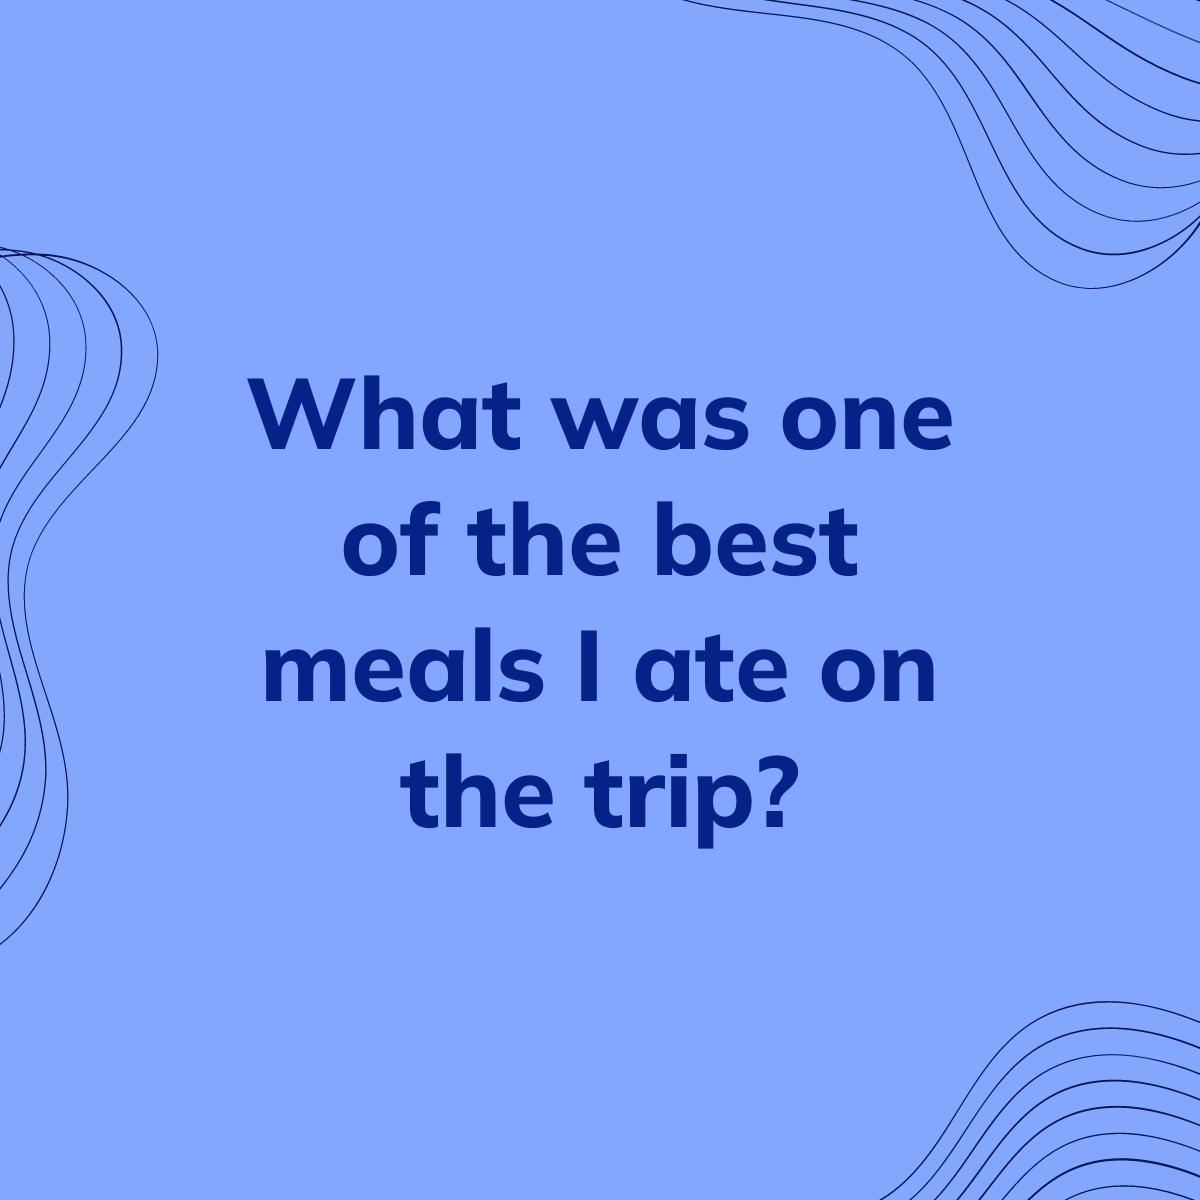 Journal Prompt: What was one of the best meals I ate on the trip?